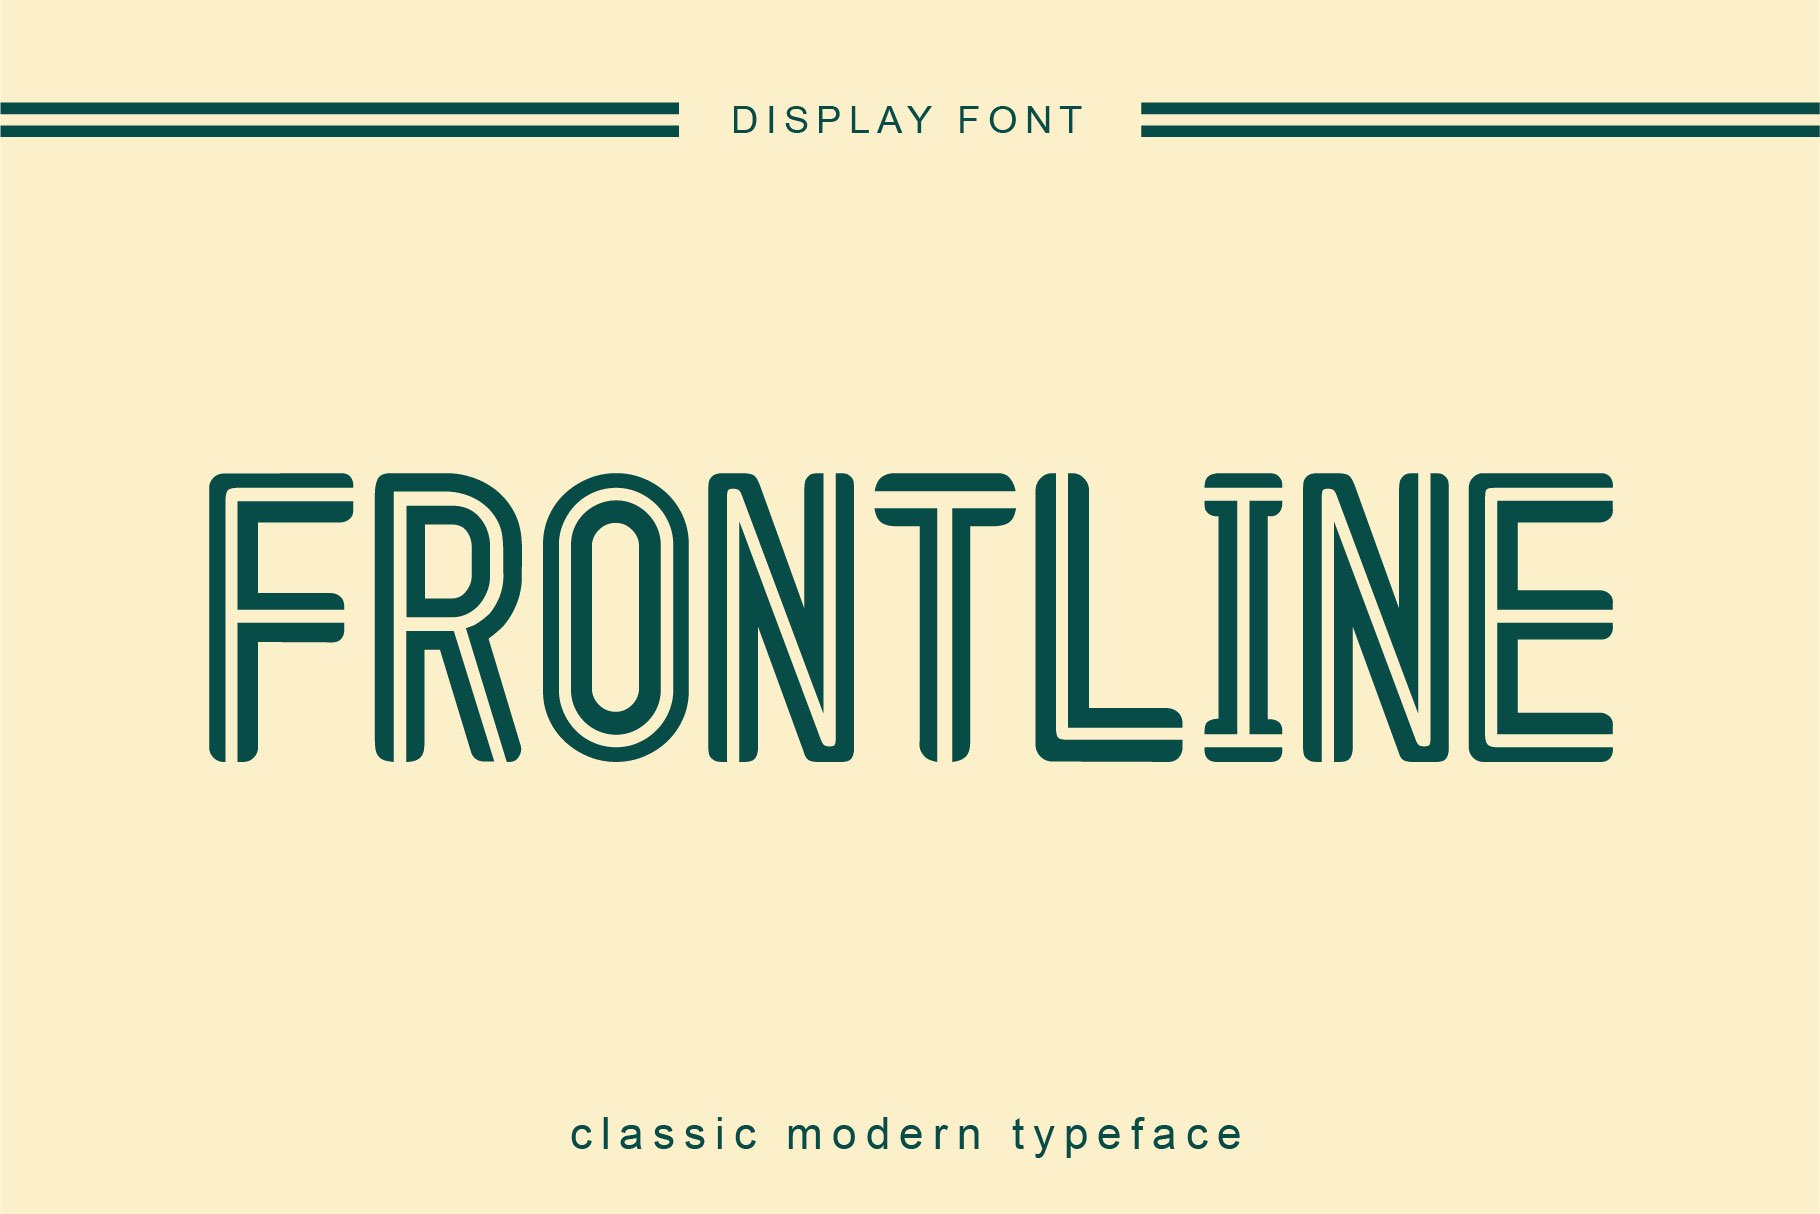 frontline classic font cover image.